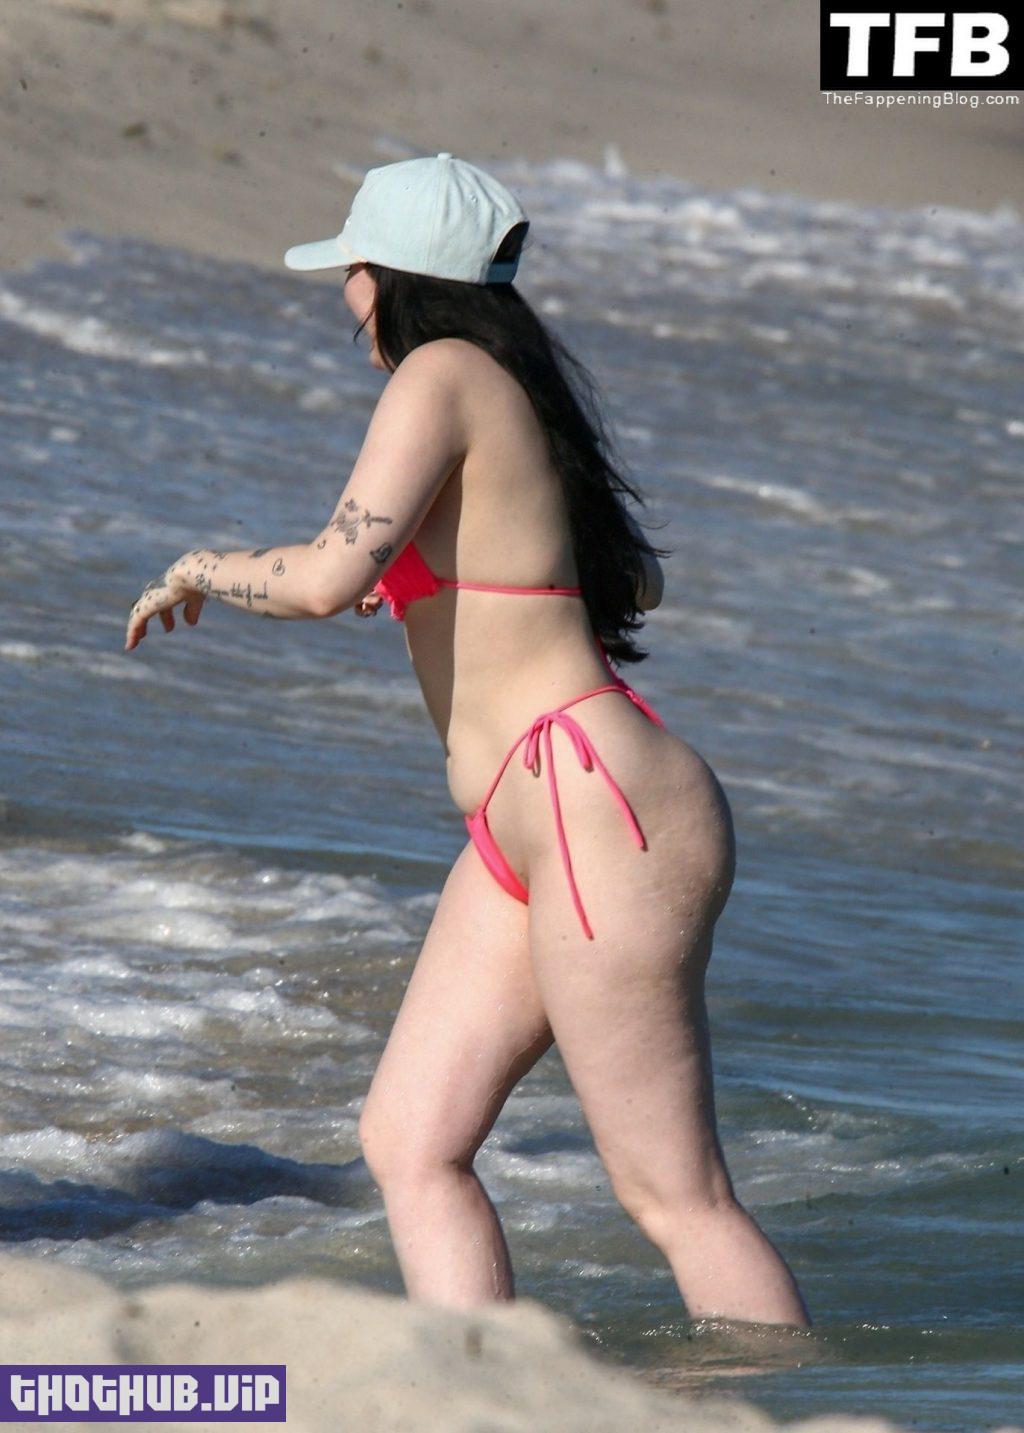 Sexy Noah Cyrus Enjoys A Sunny Day With Family And Friends In Miami Beach (37 Photos) On Thothub photo